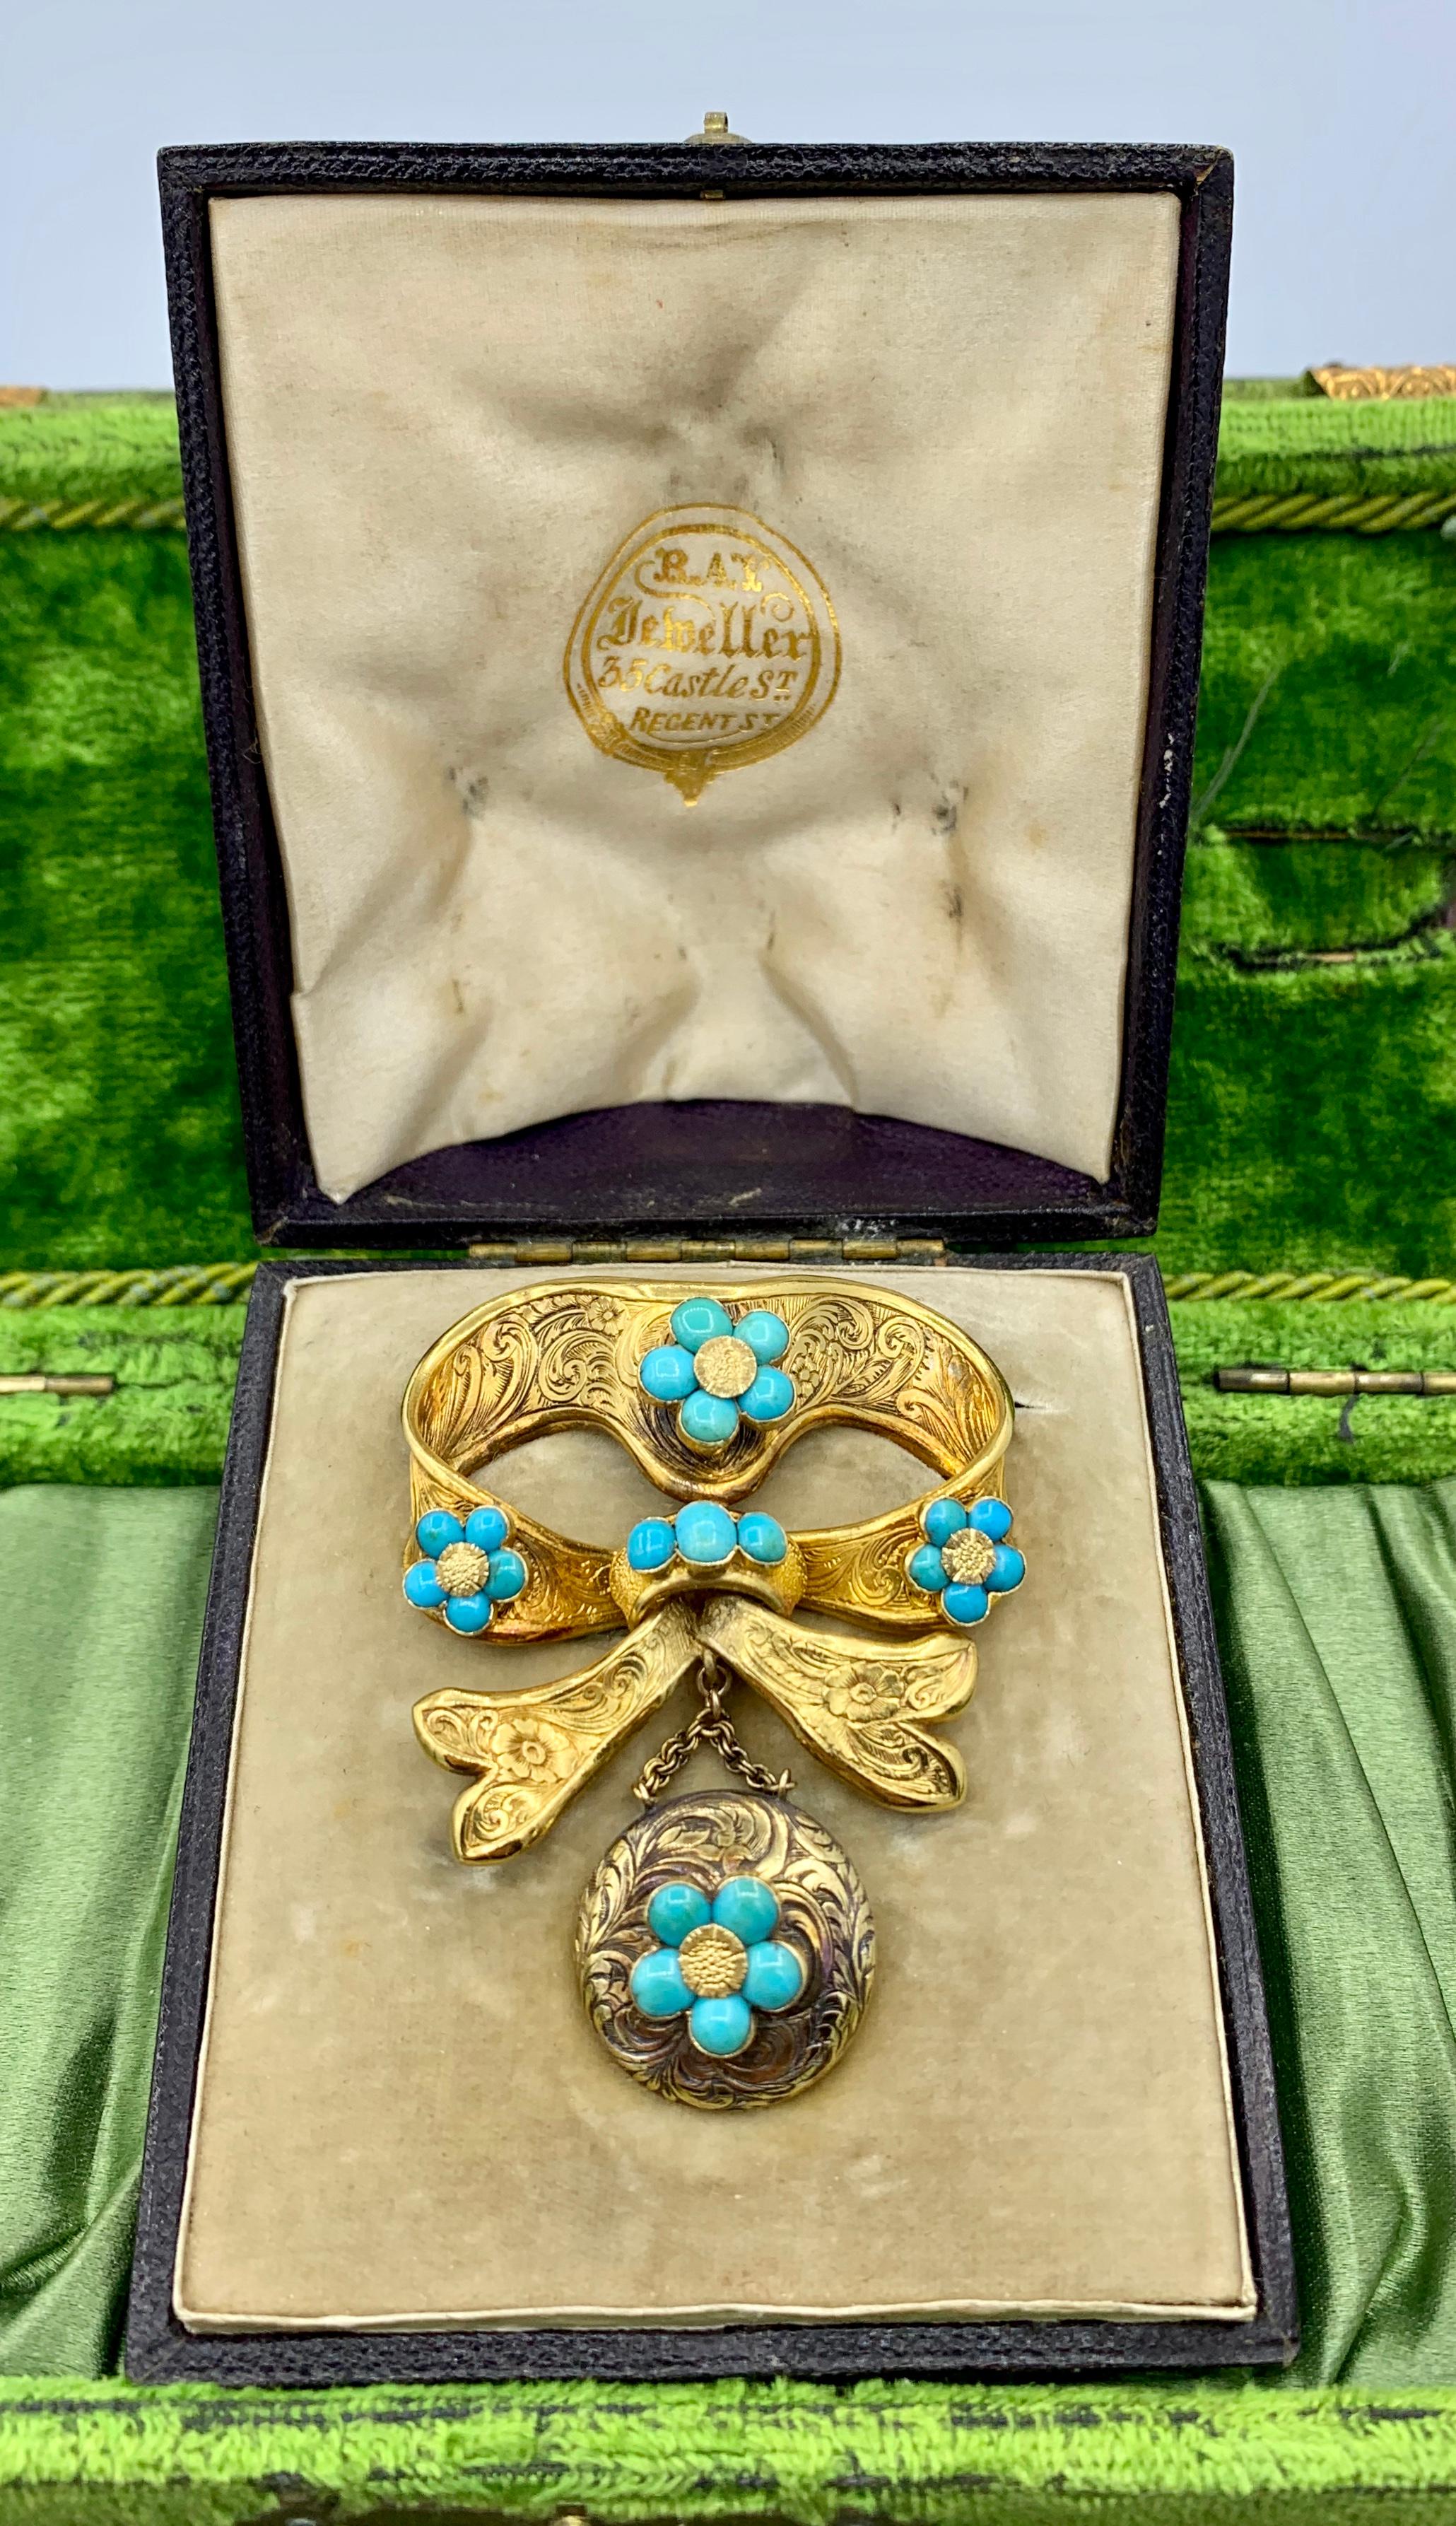 This is a stunning early Victorian - Georgian Antique 14 Karat Gold and Turquoise Bow Forget Me Not Flower Brooch with a hanging locket pendant.  The 23 round Persian Turquoise cabochons are absolutely exquisite.  The jewels are set in Forget Me Not